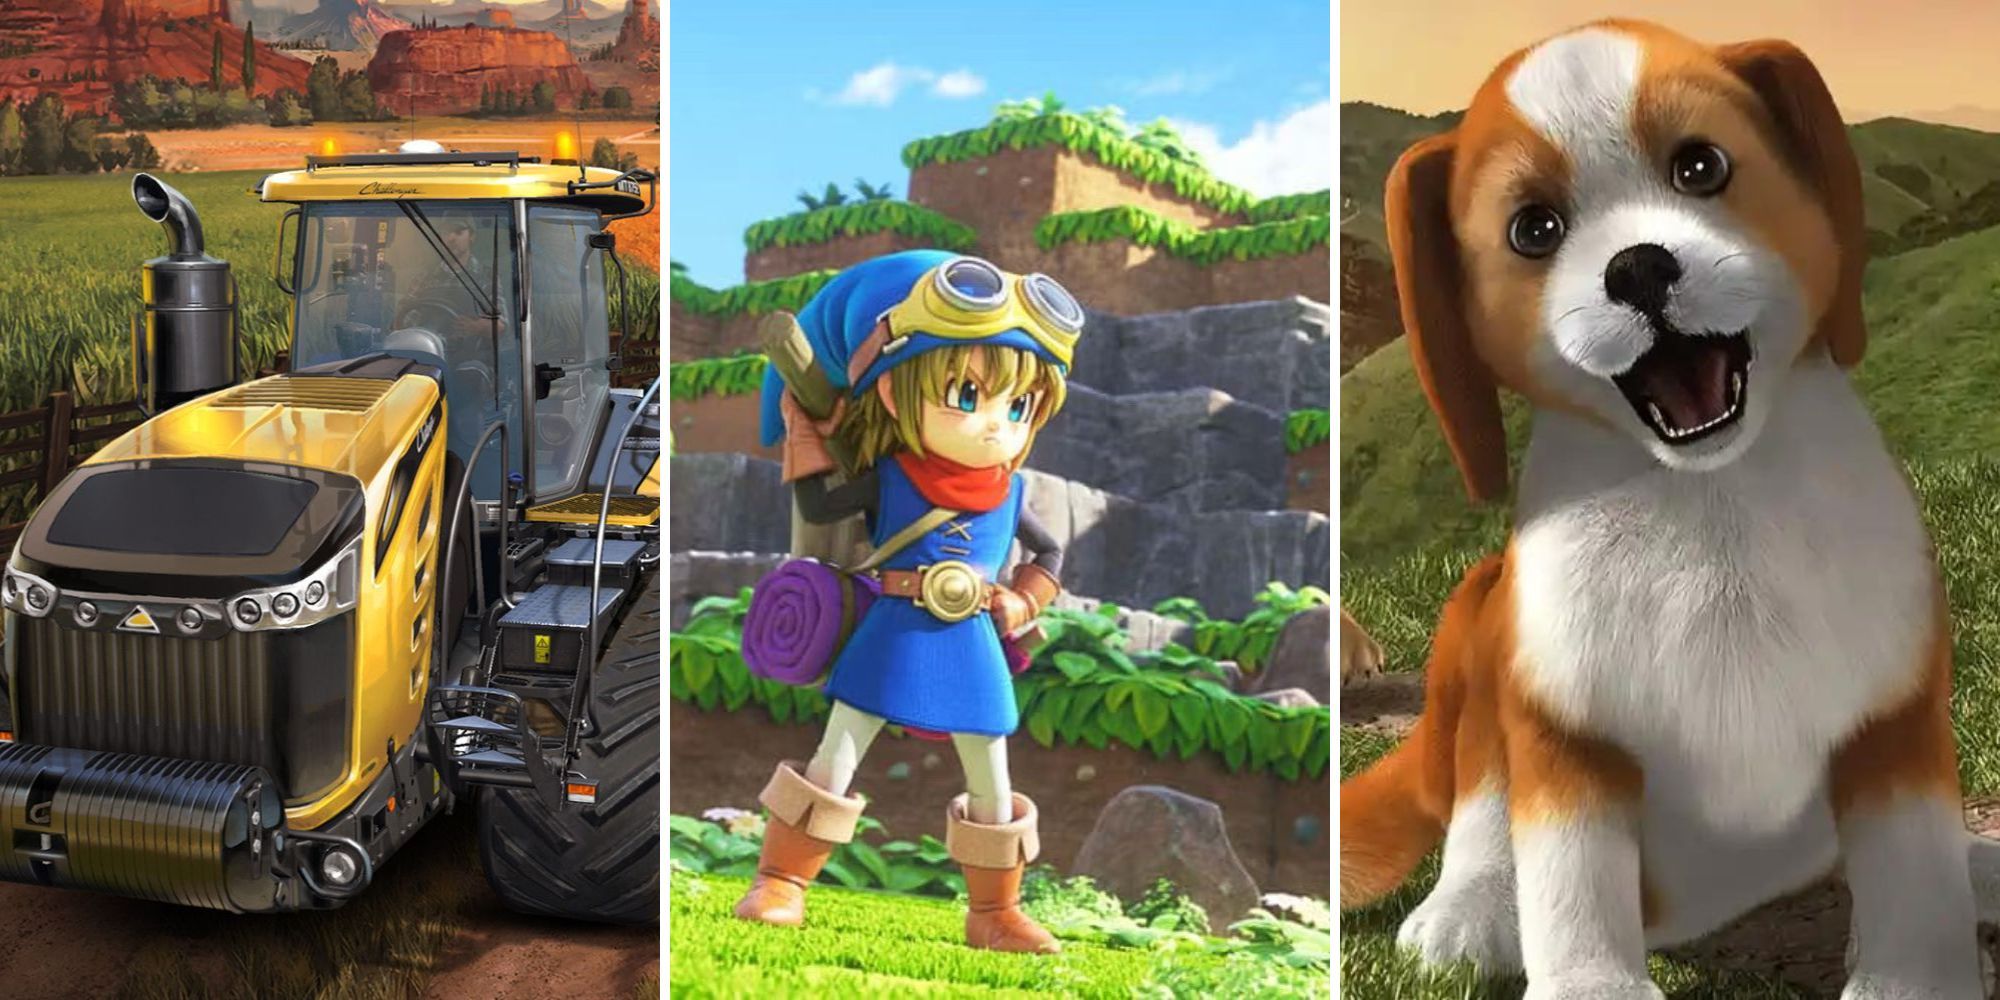 A grid showing the simulation games Farming Simulator 18, Dragon Quest Builders, and PS Vita Pets